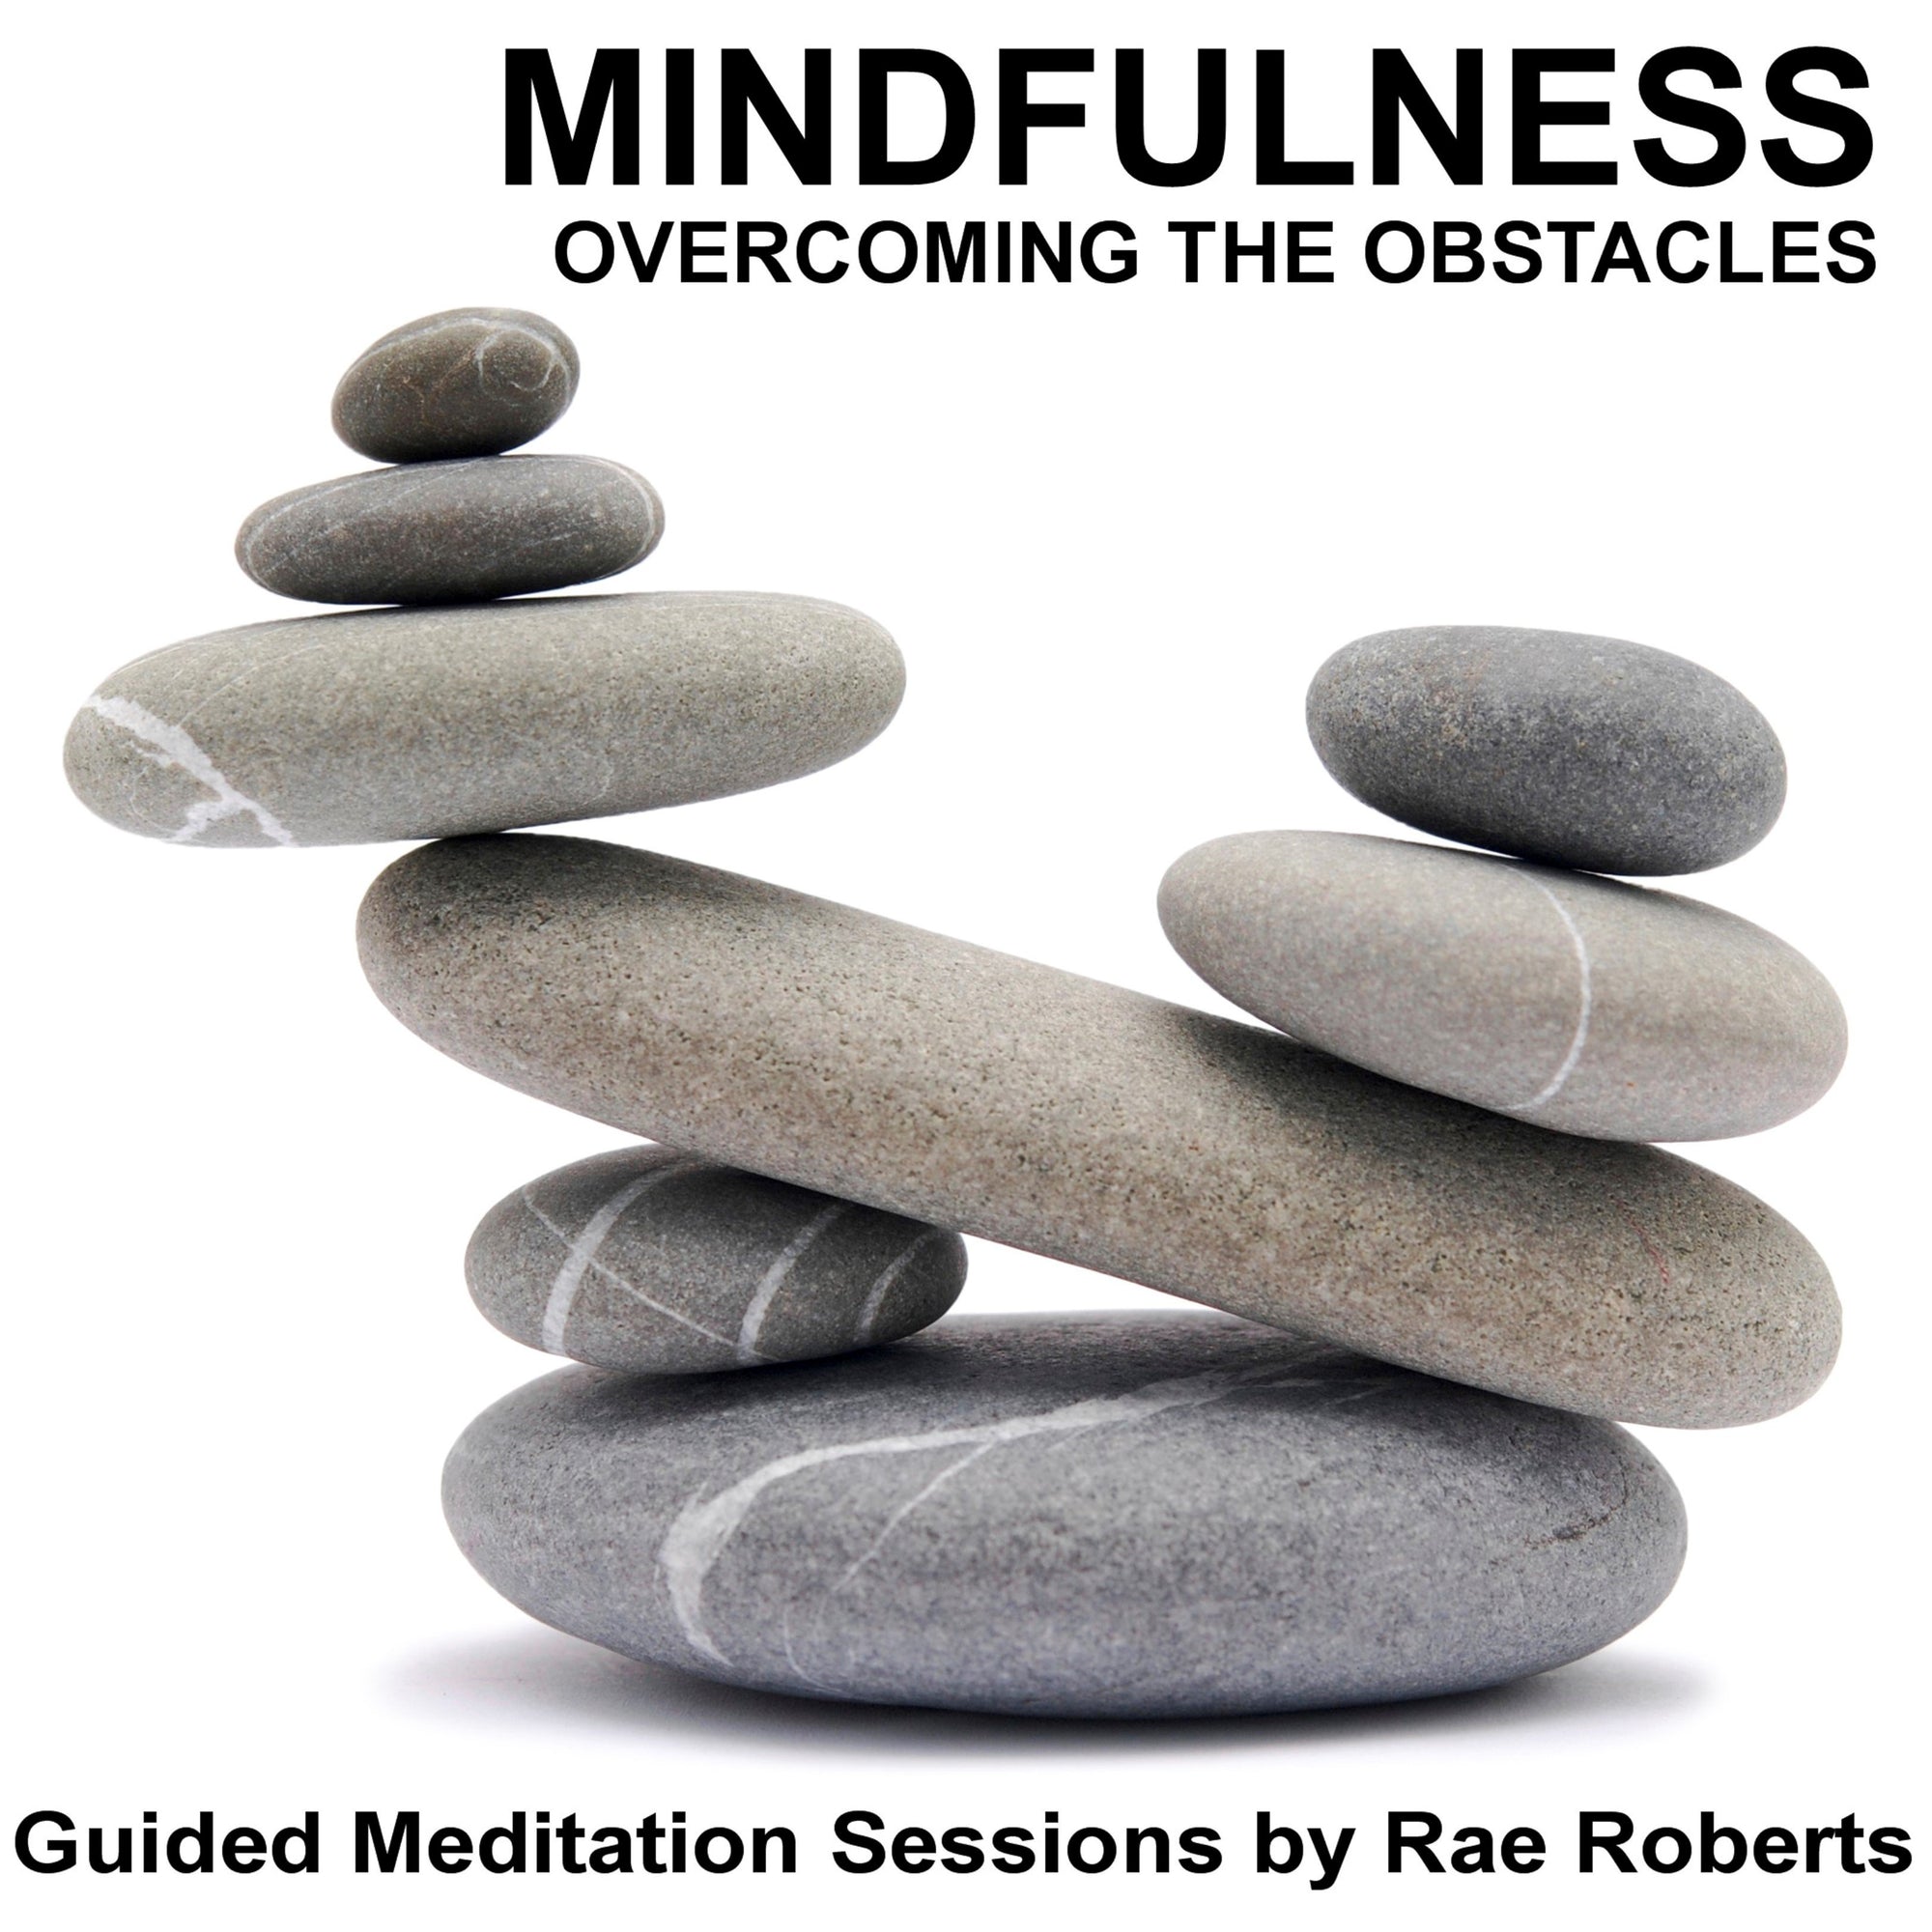 Mindfulness - Overcoming the Obstacles